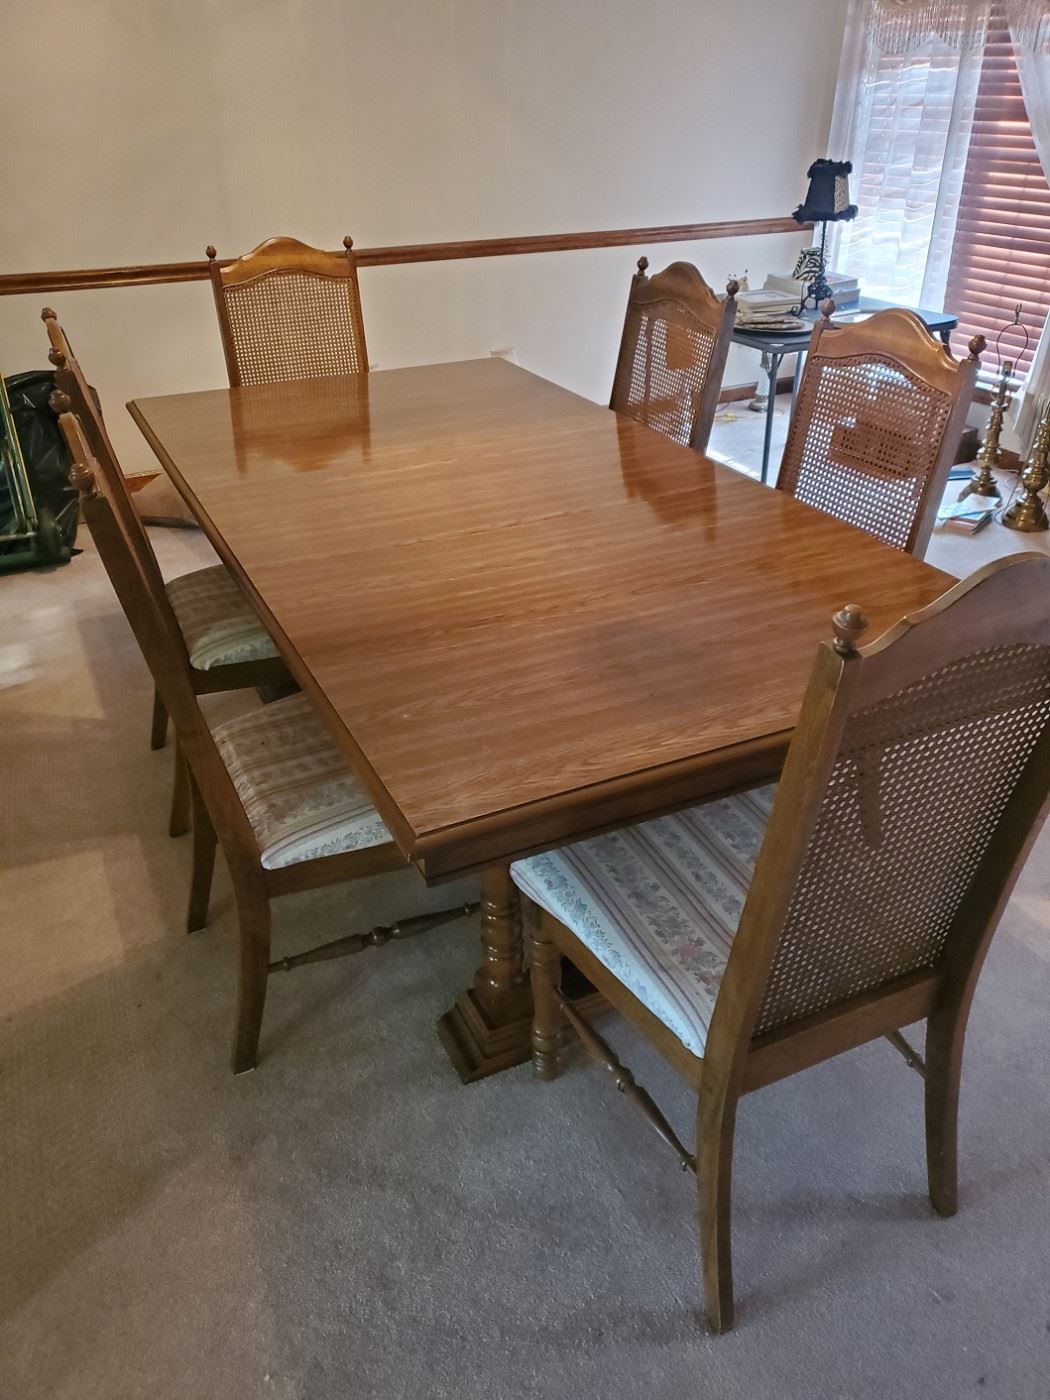 Utterly astounding vintage (circa 1994) dining table, literally in “just came off the Goldsmith’s furniture showroom floor day before yesterday” condition!  Includes the six chairs shown.  Main top is 42 x 62, plus an 18” leaf (shown with leaf.)  $250.  